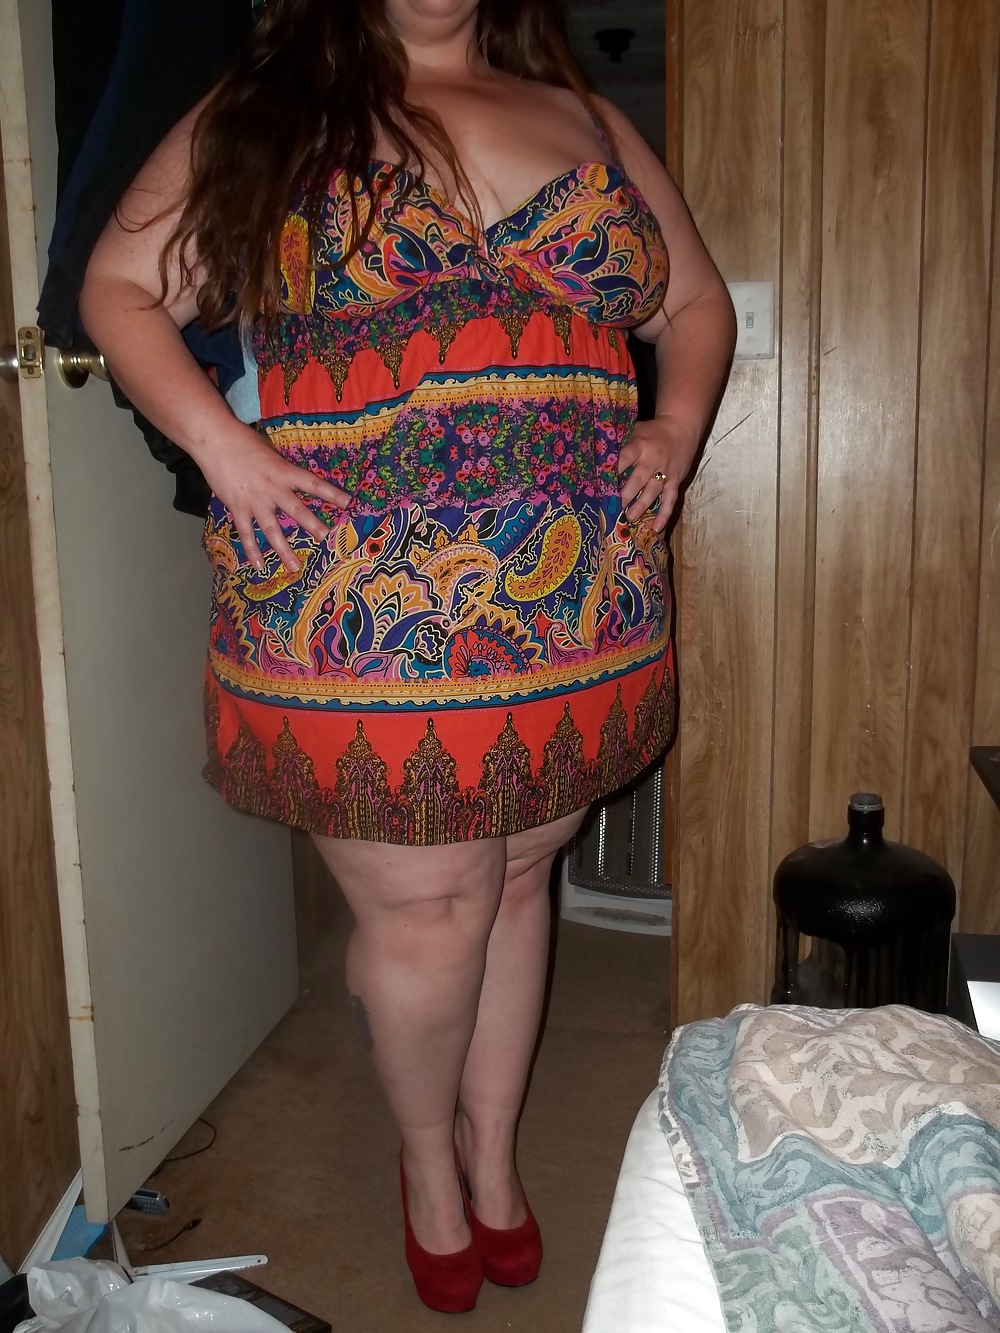 Free More of my BBW (please leave comments she loves them) photos